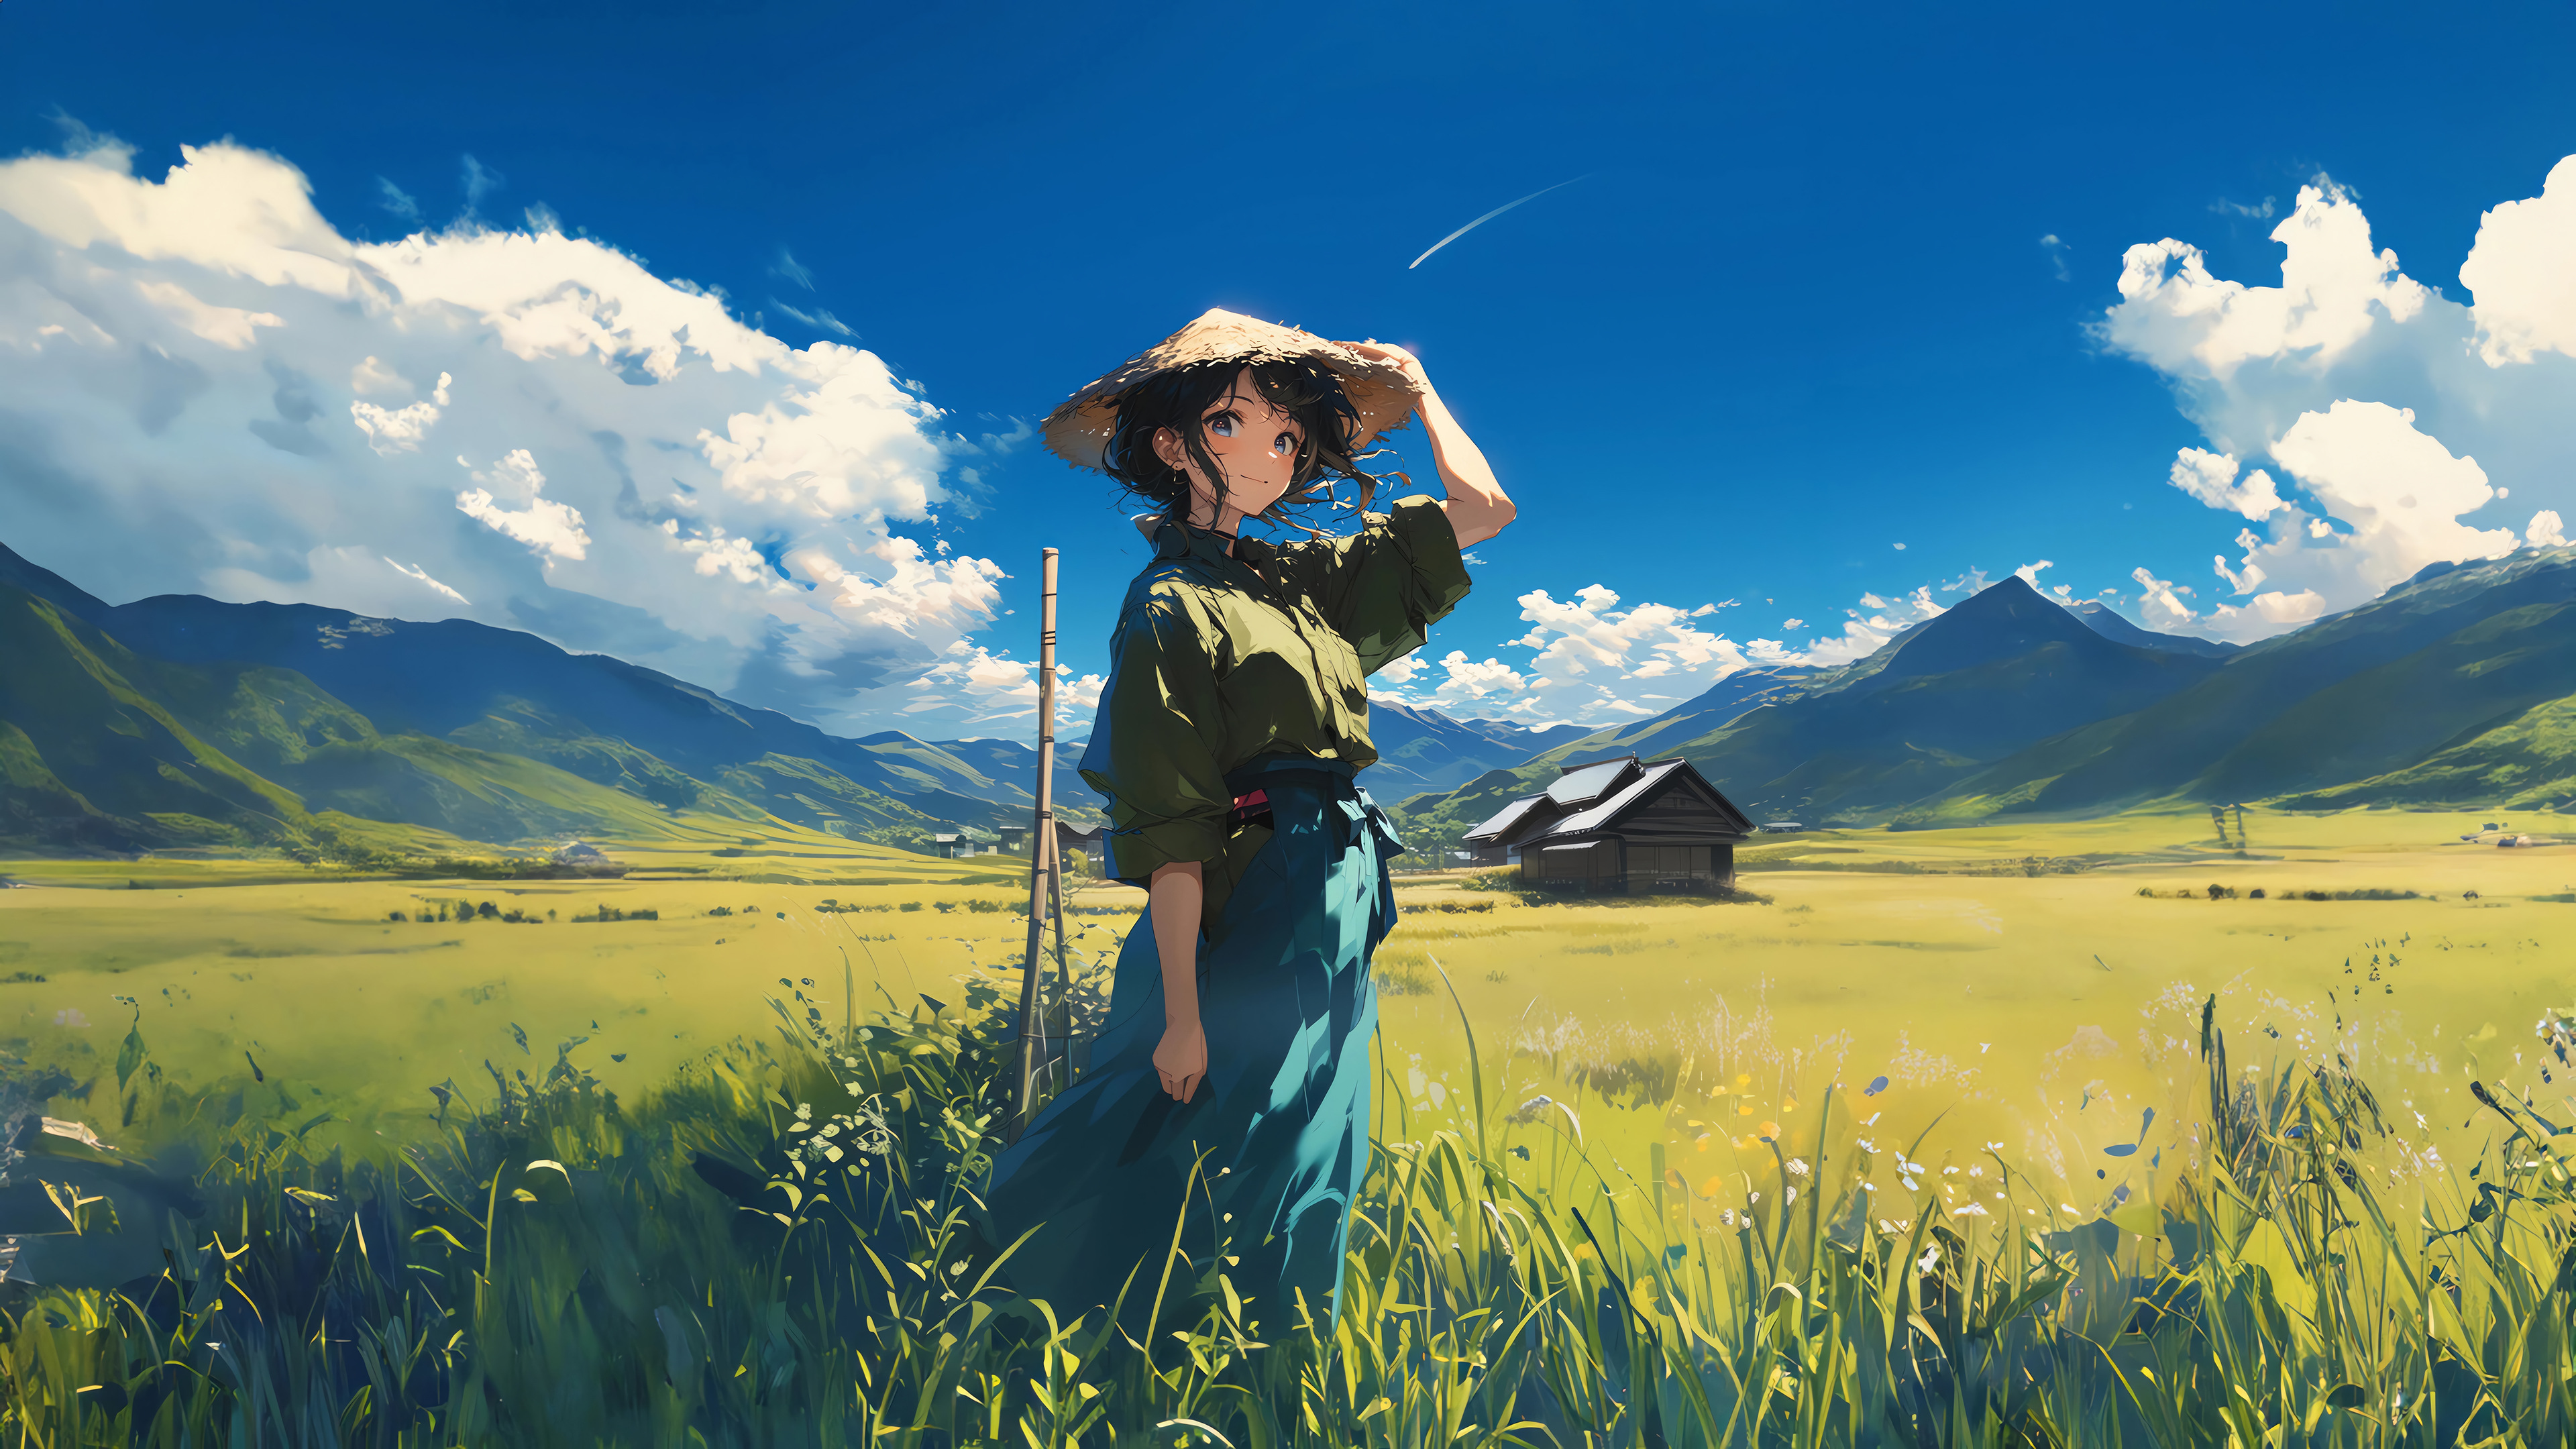 Anime 3840x2160 anime artwork digital art concept art anime girls landscape sky clouds field mountains AI art house painting grass smiling looking at viewer